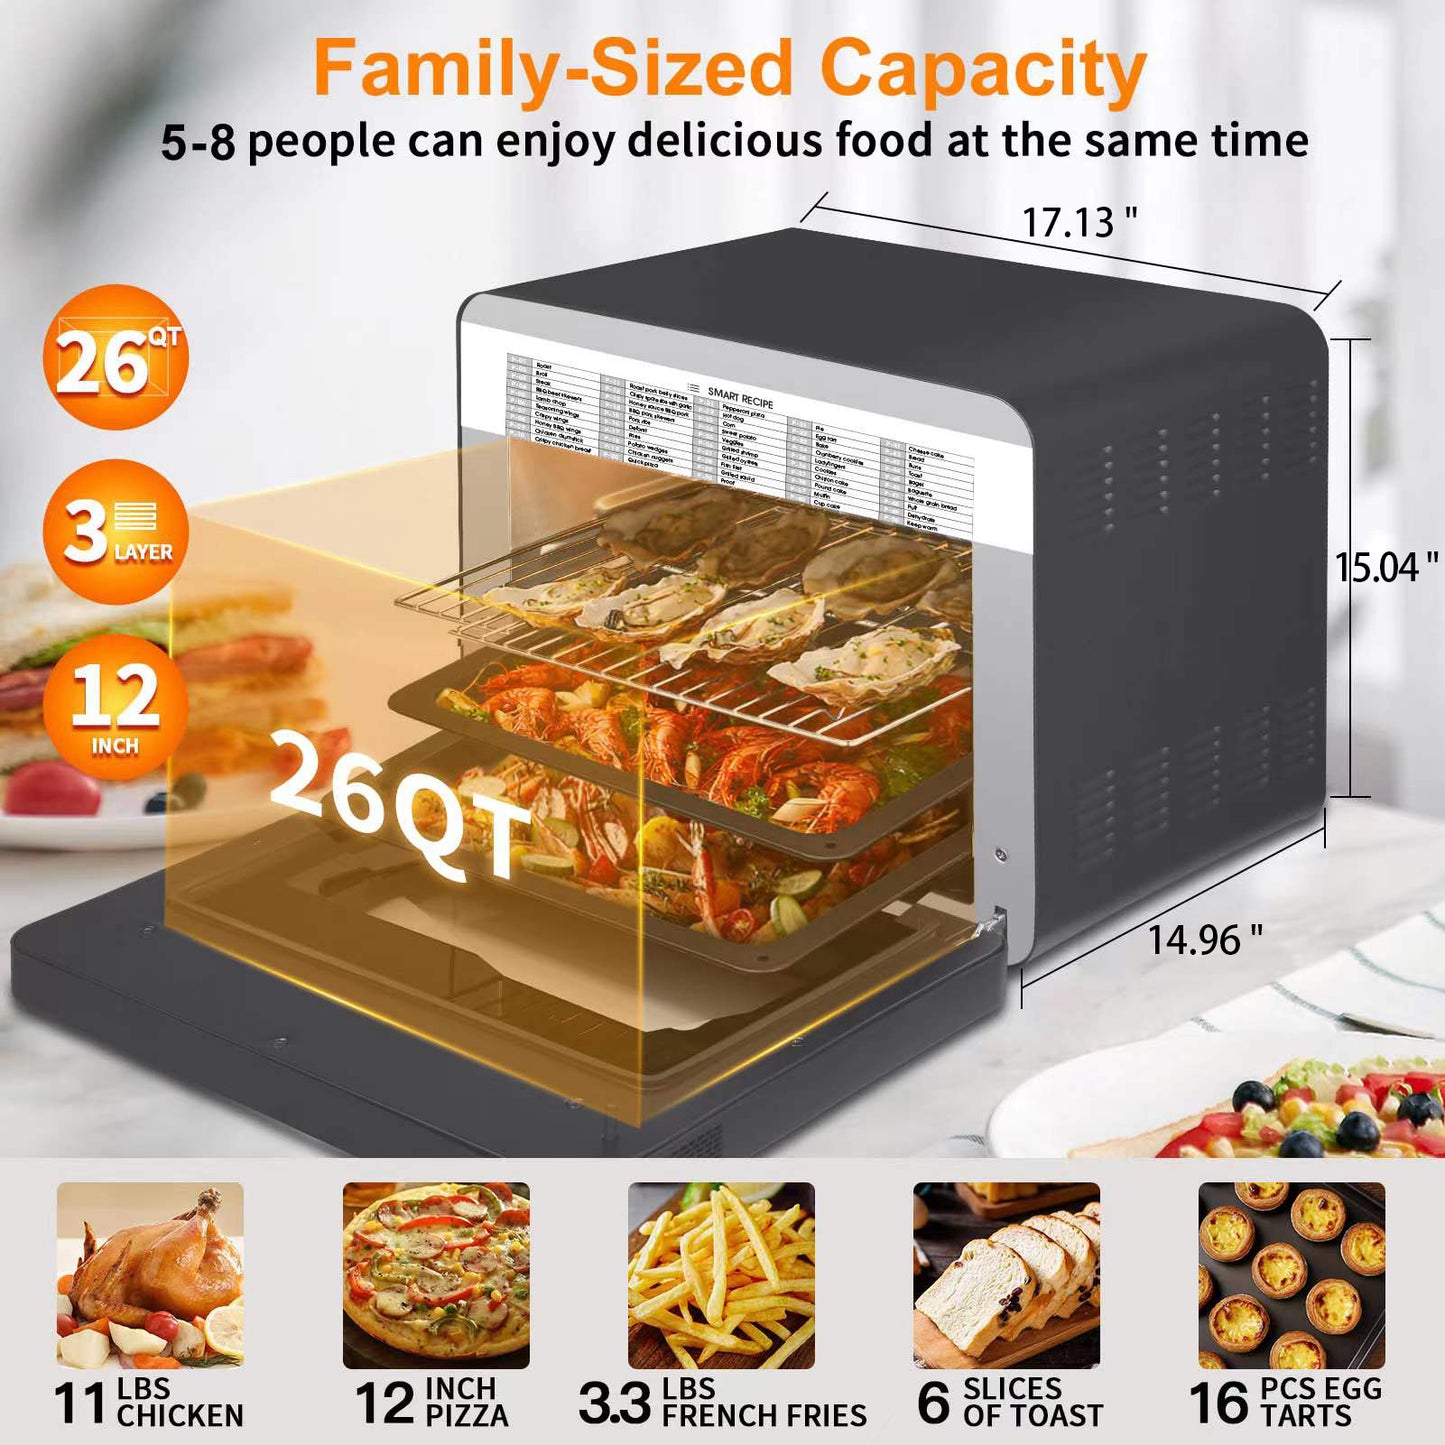 Air Fryer Toast Oven Combo  Steam Convection Oven Countertop